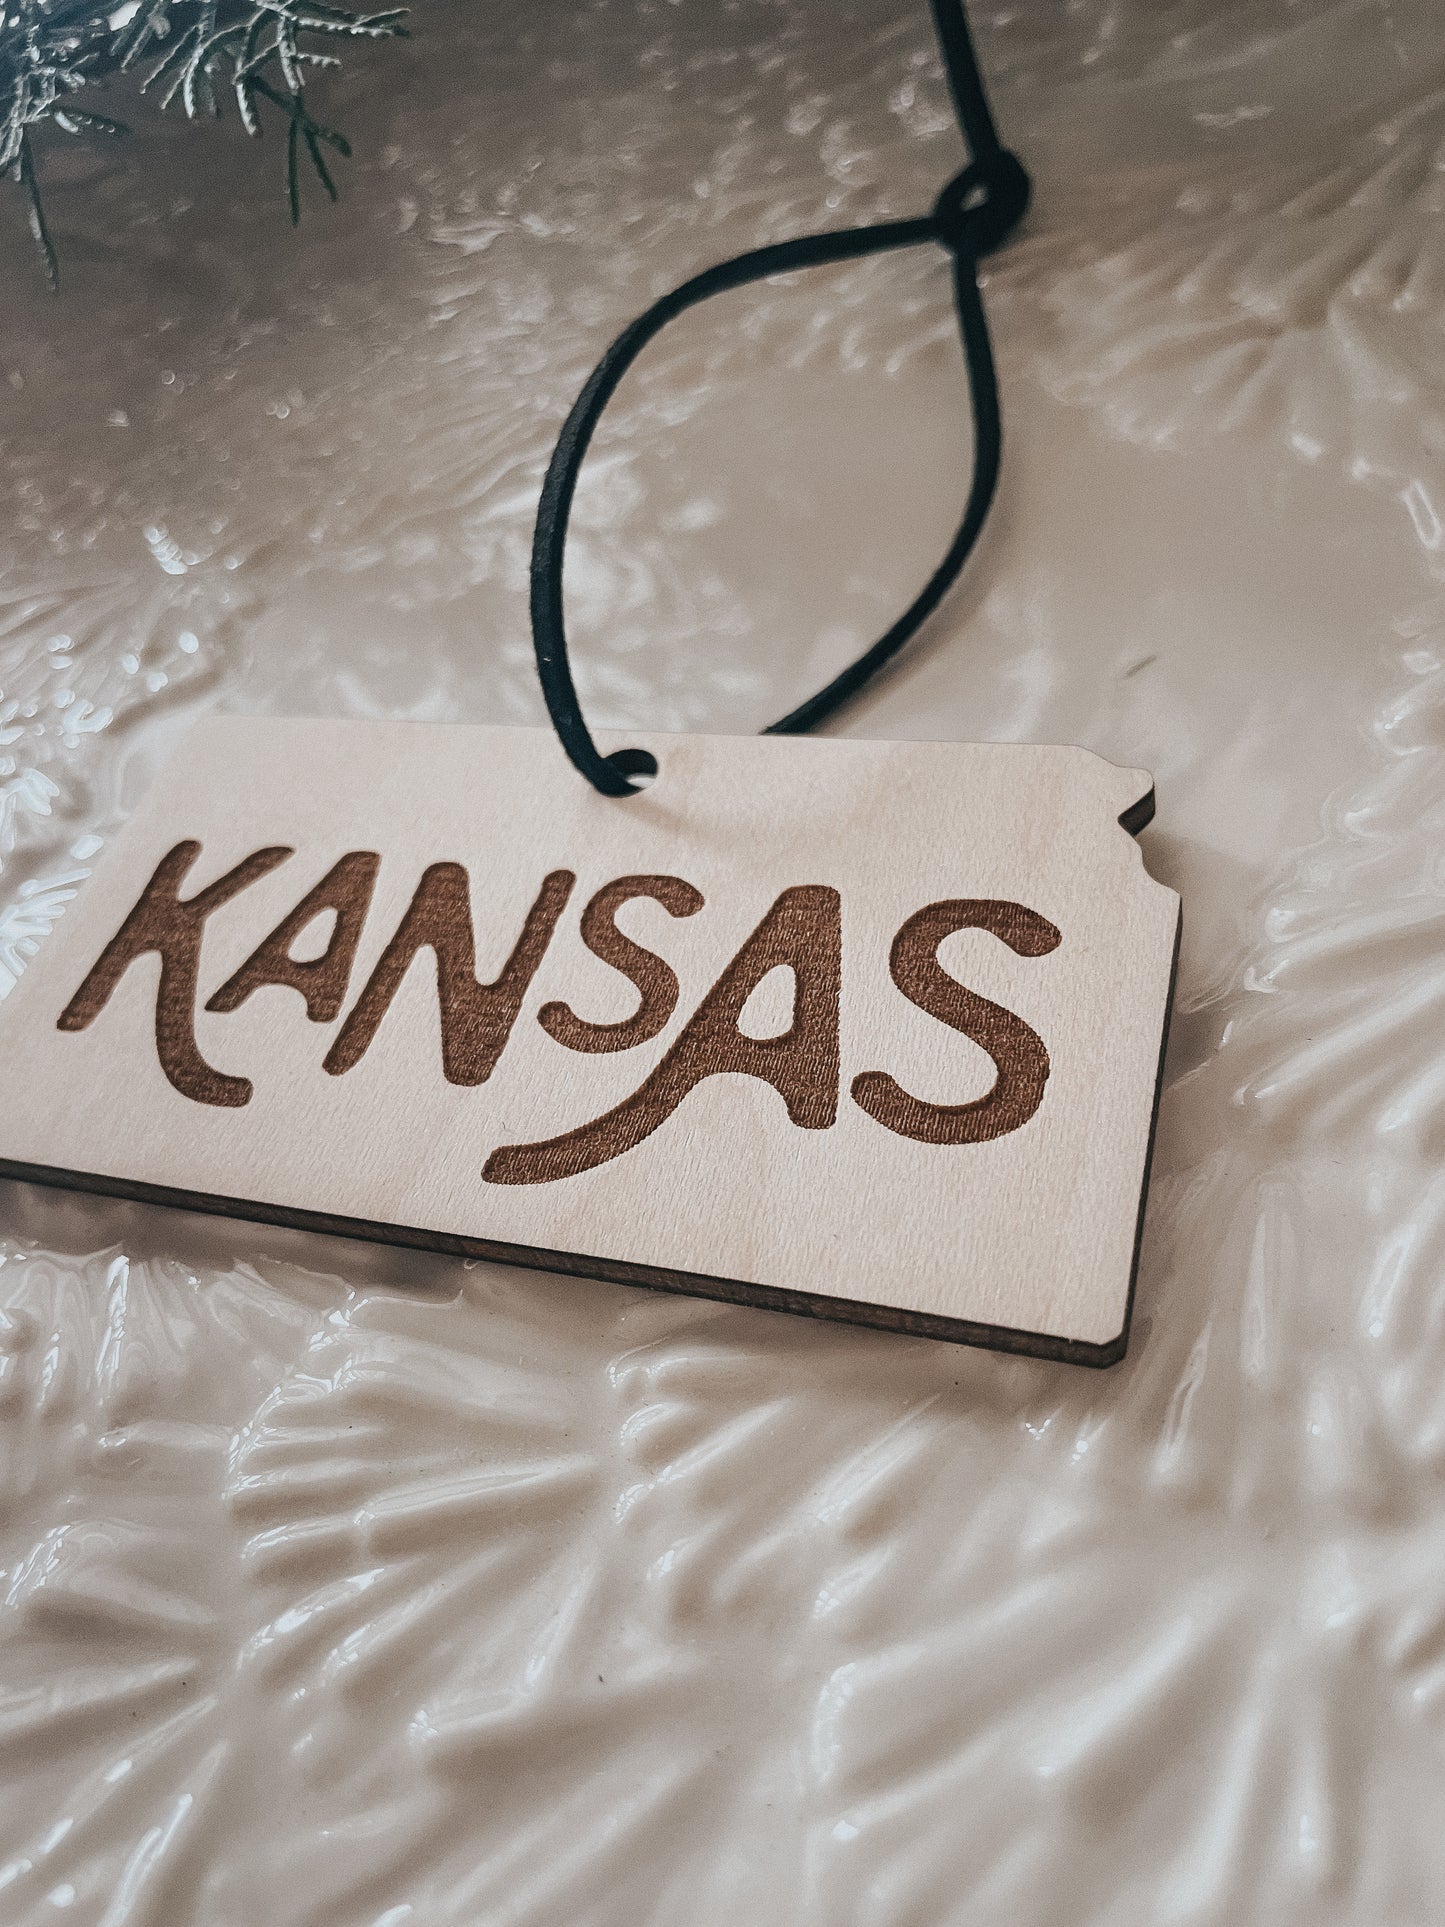 Kansas or State | Ornaments